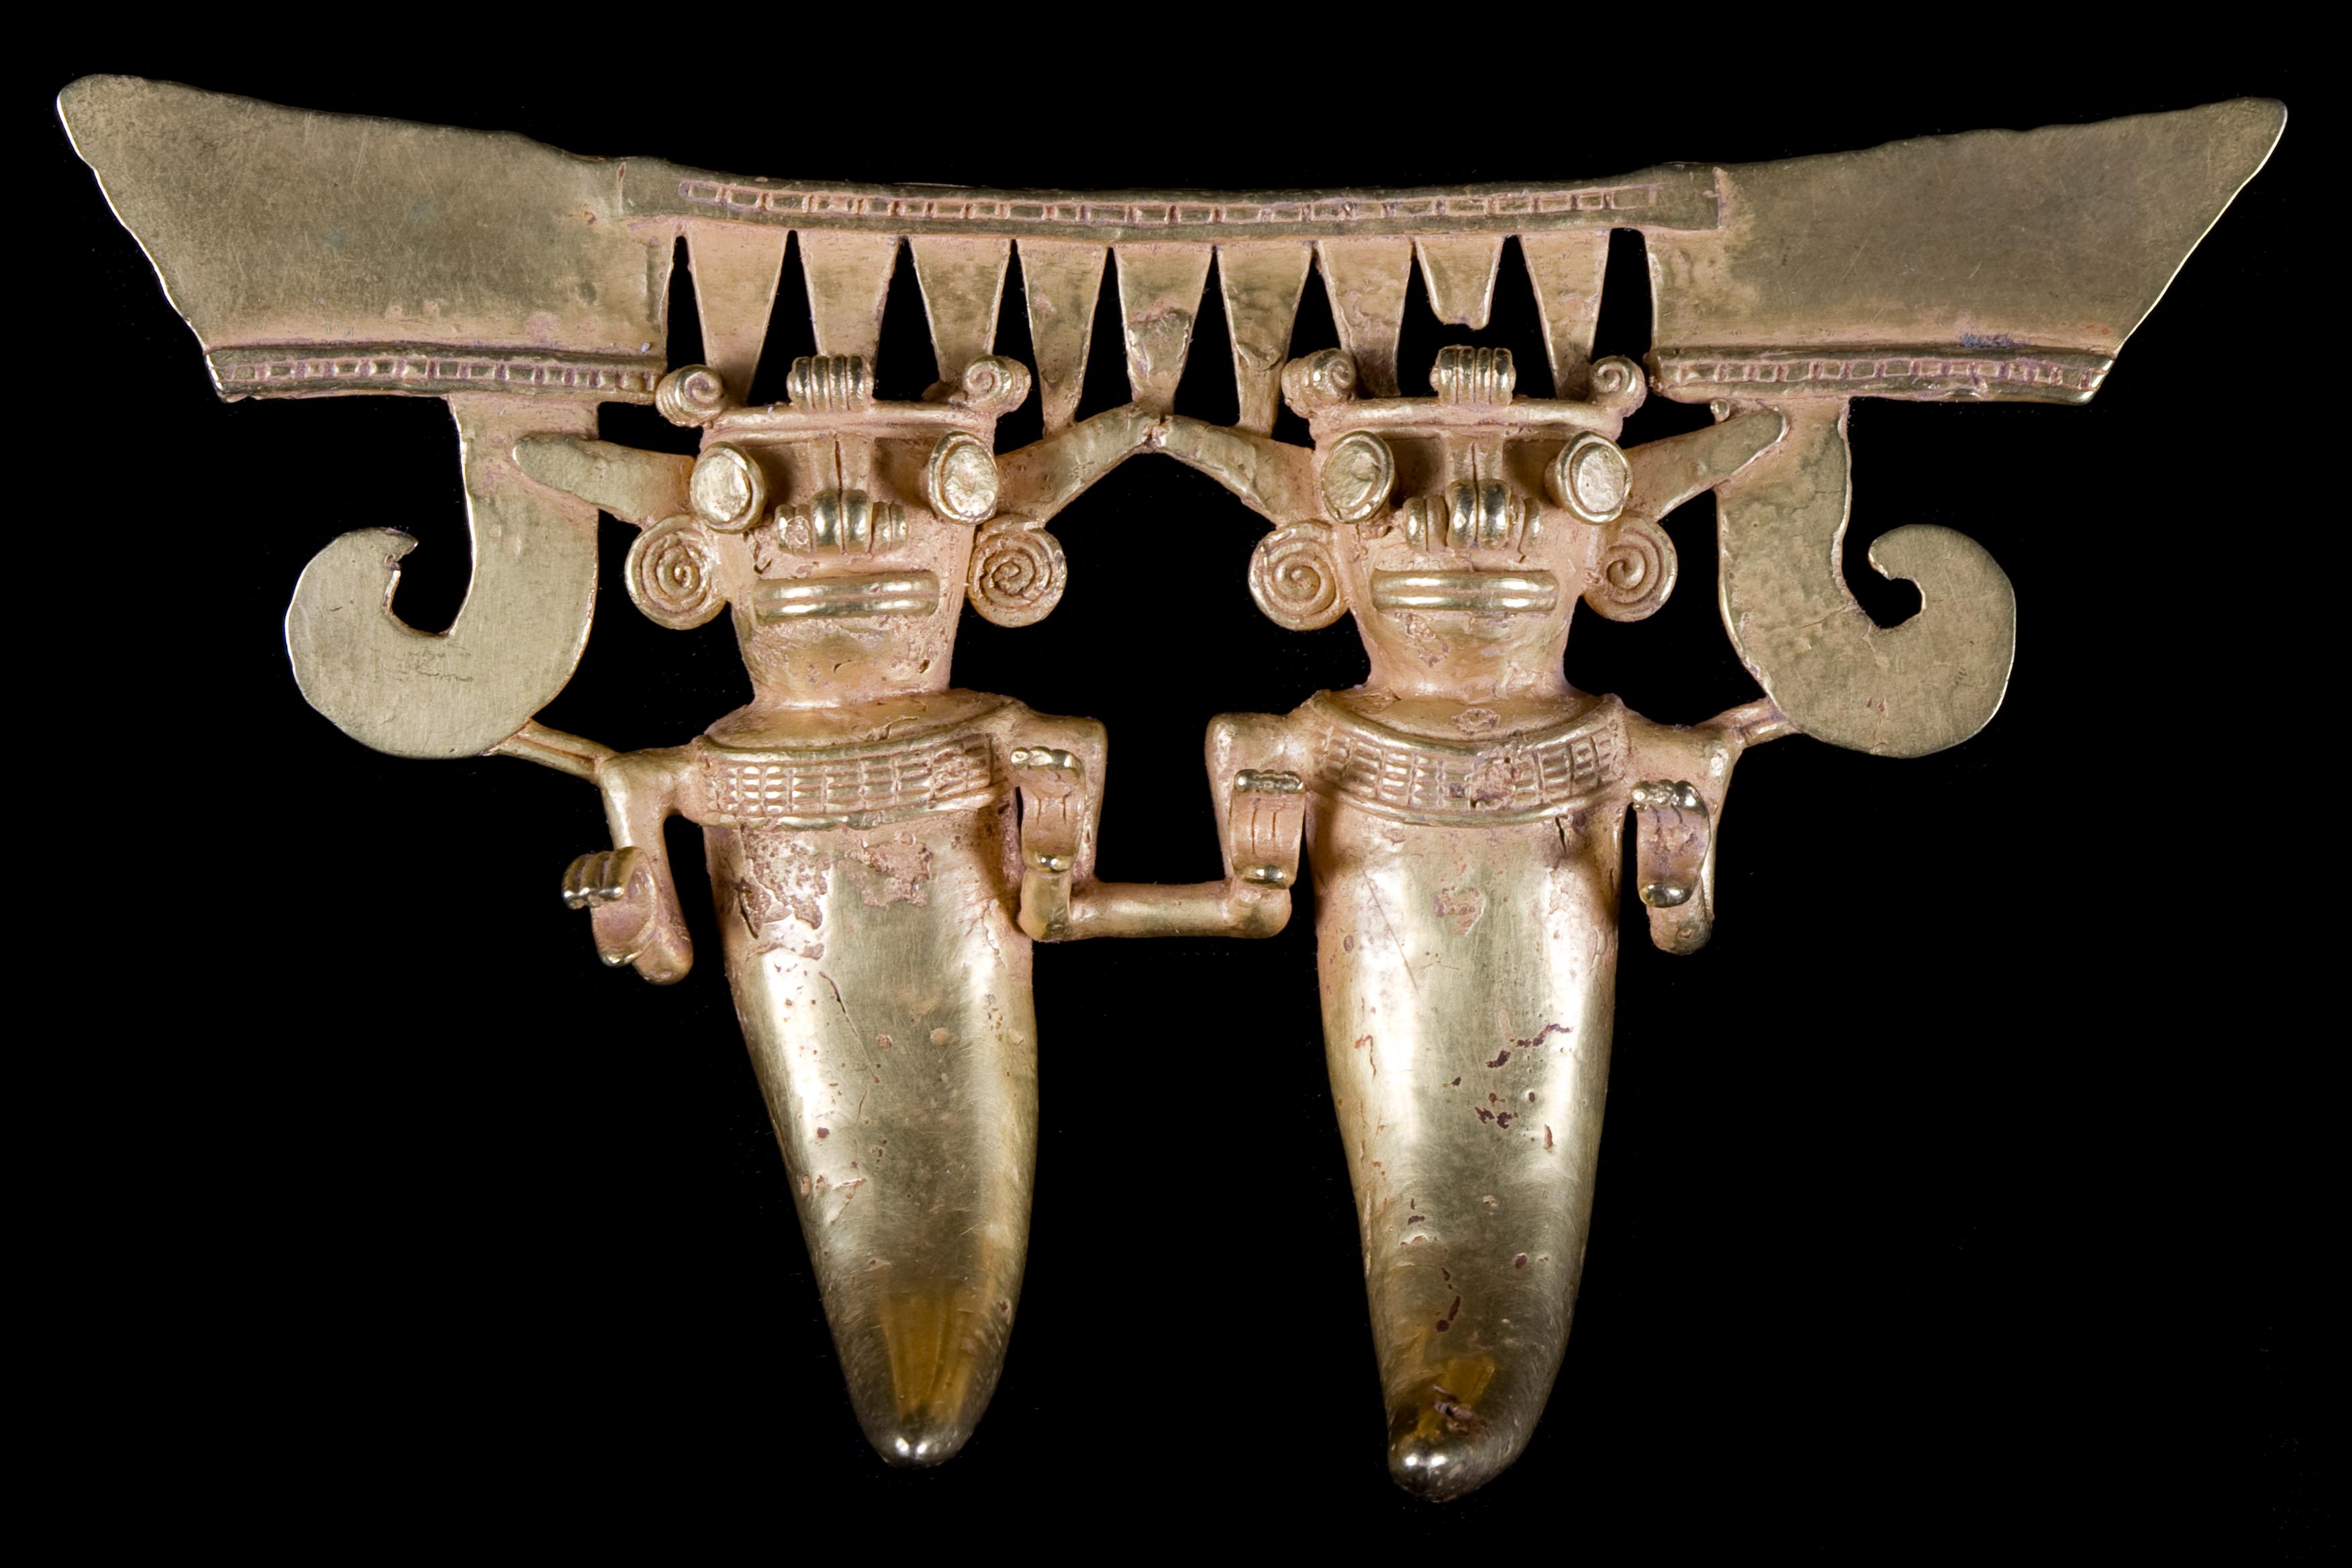 Southern Costa Rica/Western Panama, circa 800 to 1500 AD. Gold Veraguas-Chiriqui-Diquis twin figure pendant cast by the lost-wax (cire perdu) grasping an imaginary club with their claws, with bat ears and pop out eyes and each figure ending in the